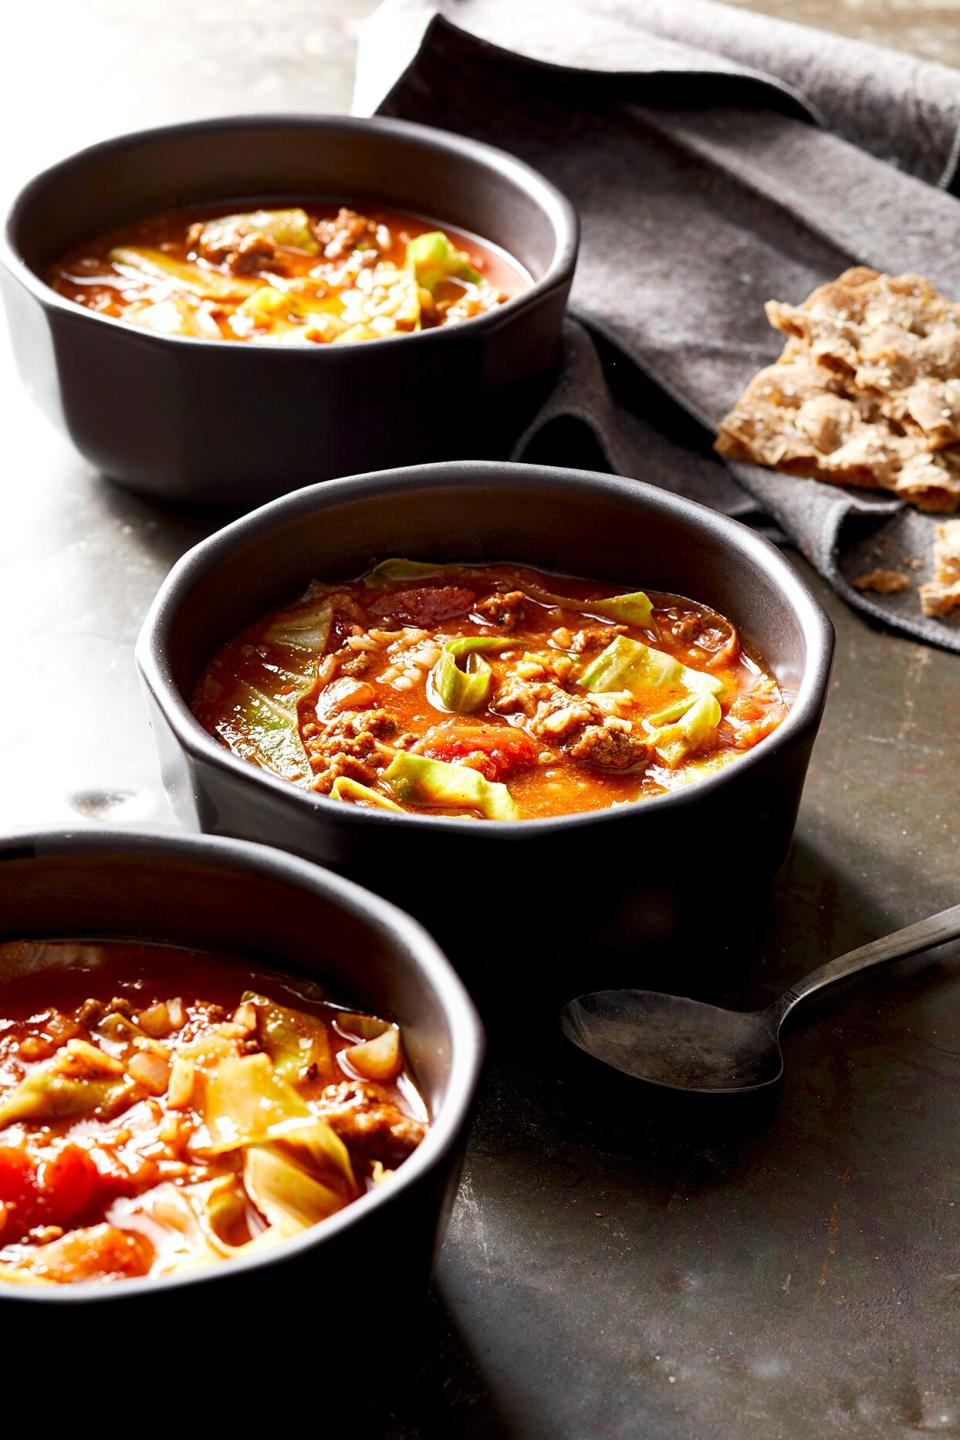 Cabbage might give this soup its name, but ground beef makes it hearty. Serve this warm, comforting soup on a chilly winter night.